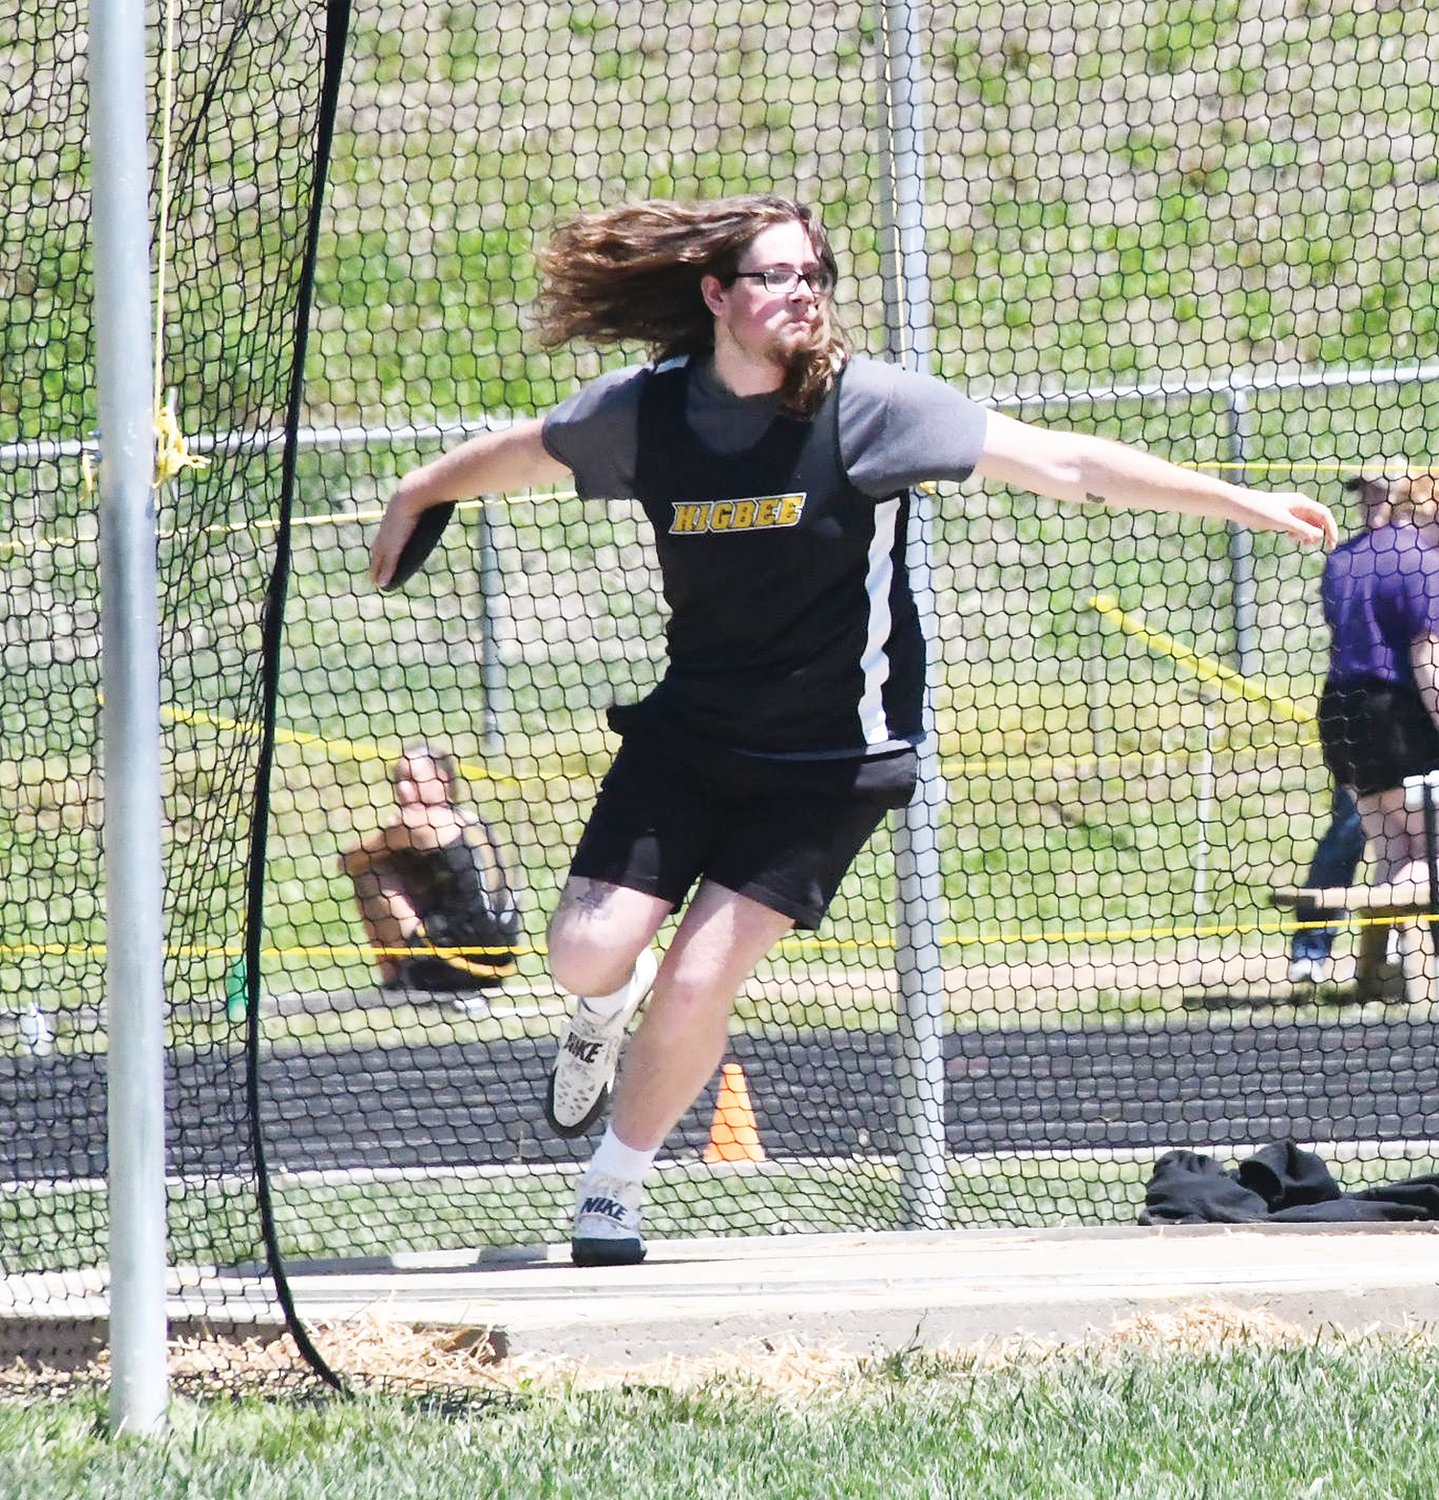 Higbee’s James Smith competes in the discus throw on Saturday at the Class 1 District 2 meet at the Bob Monnig Track Complex in Glasgow. White qualified for the sectional meet in St. Louis this week with a mark of 37.08m.